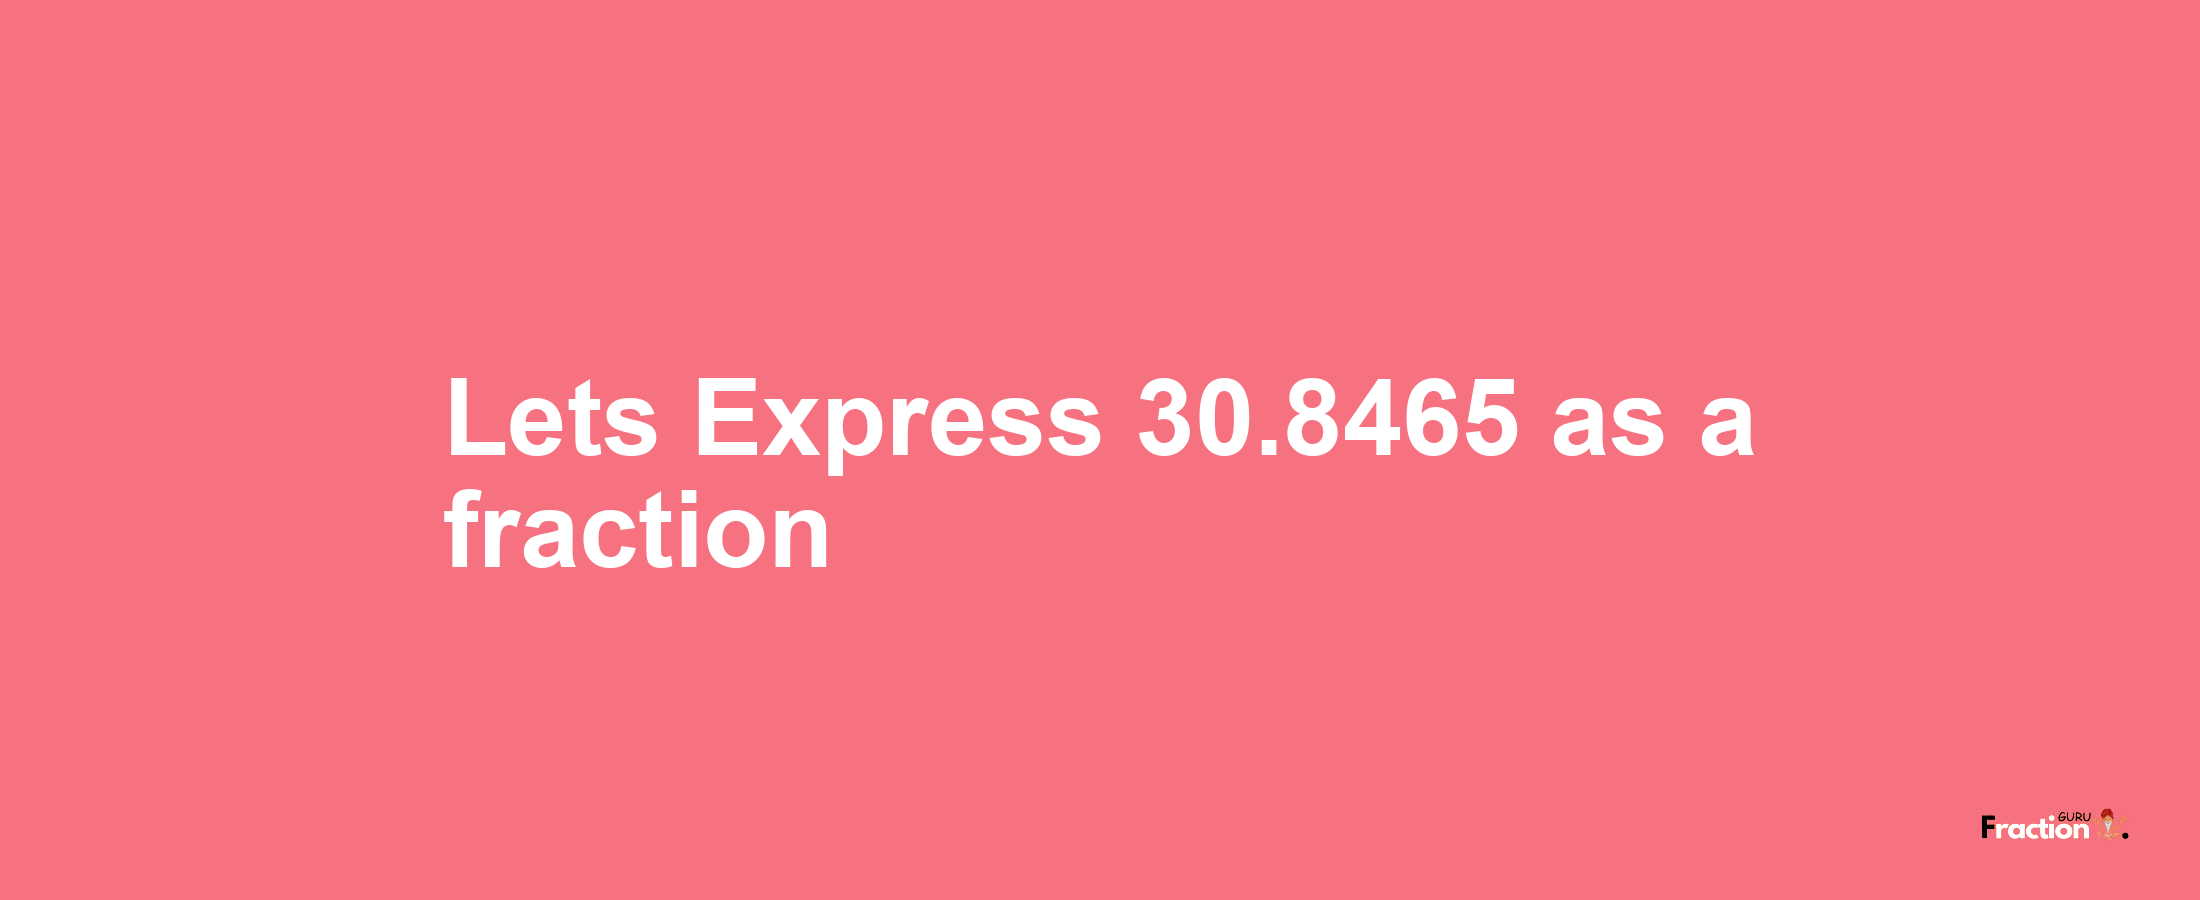 Lets Express 30.8465 as afraction